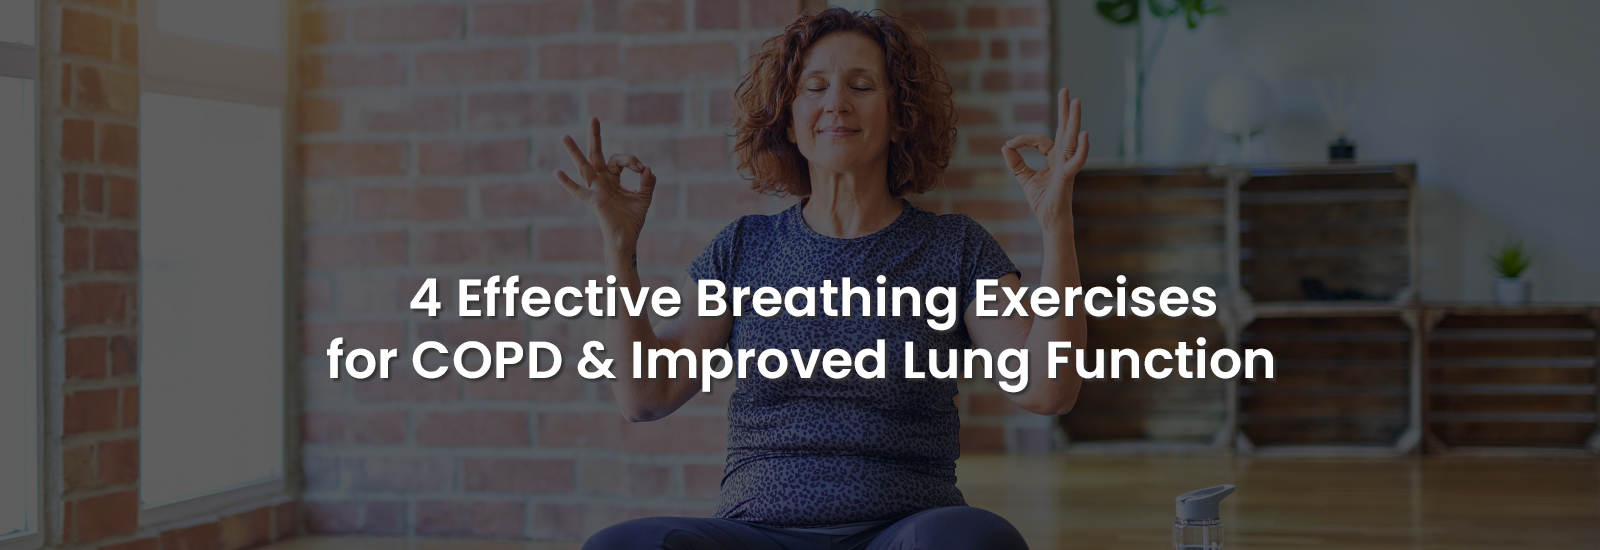 4 Effective Breathing Exercises for COPD & Improved Lung Function | Banner Image